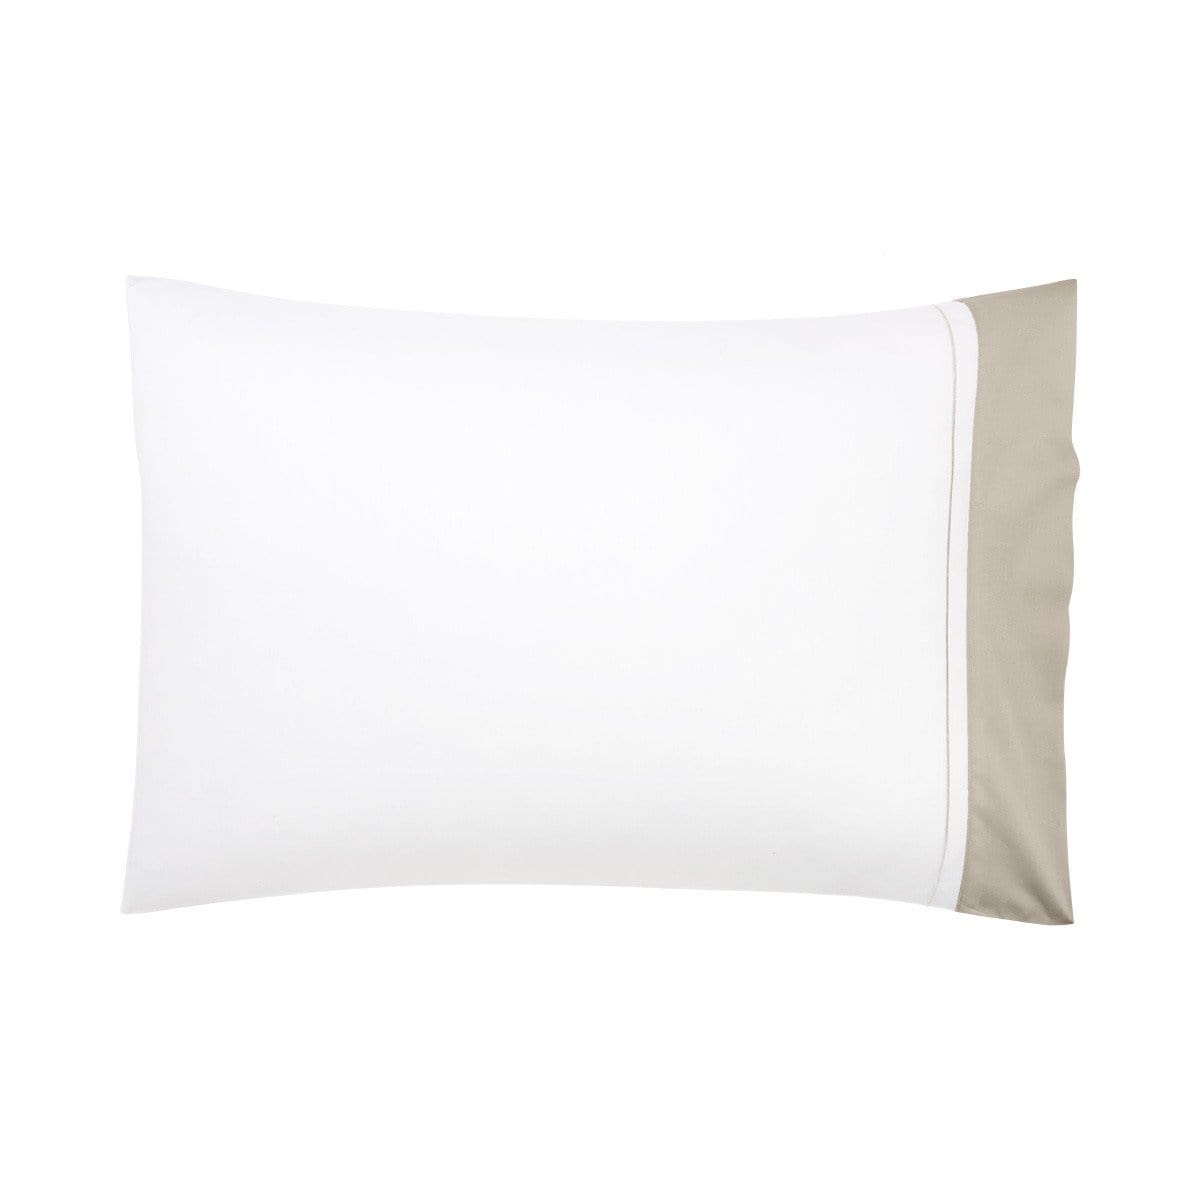 Pillowcases Lutece Pillowcase by Yves Delorme Standard / Pierre Yves Delorme